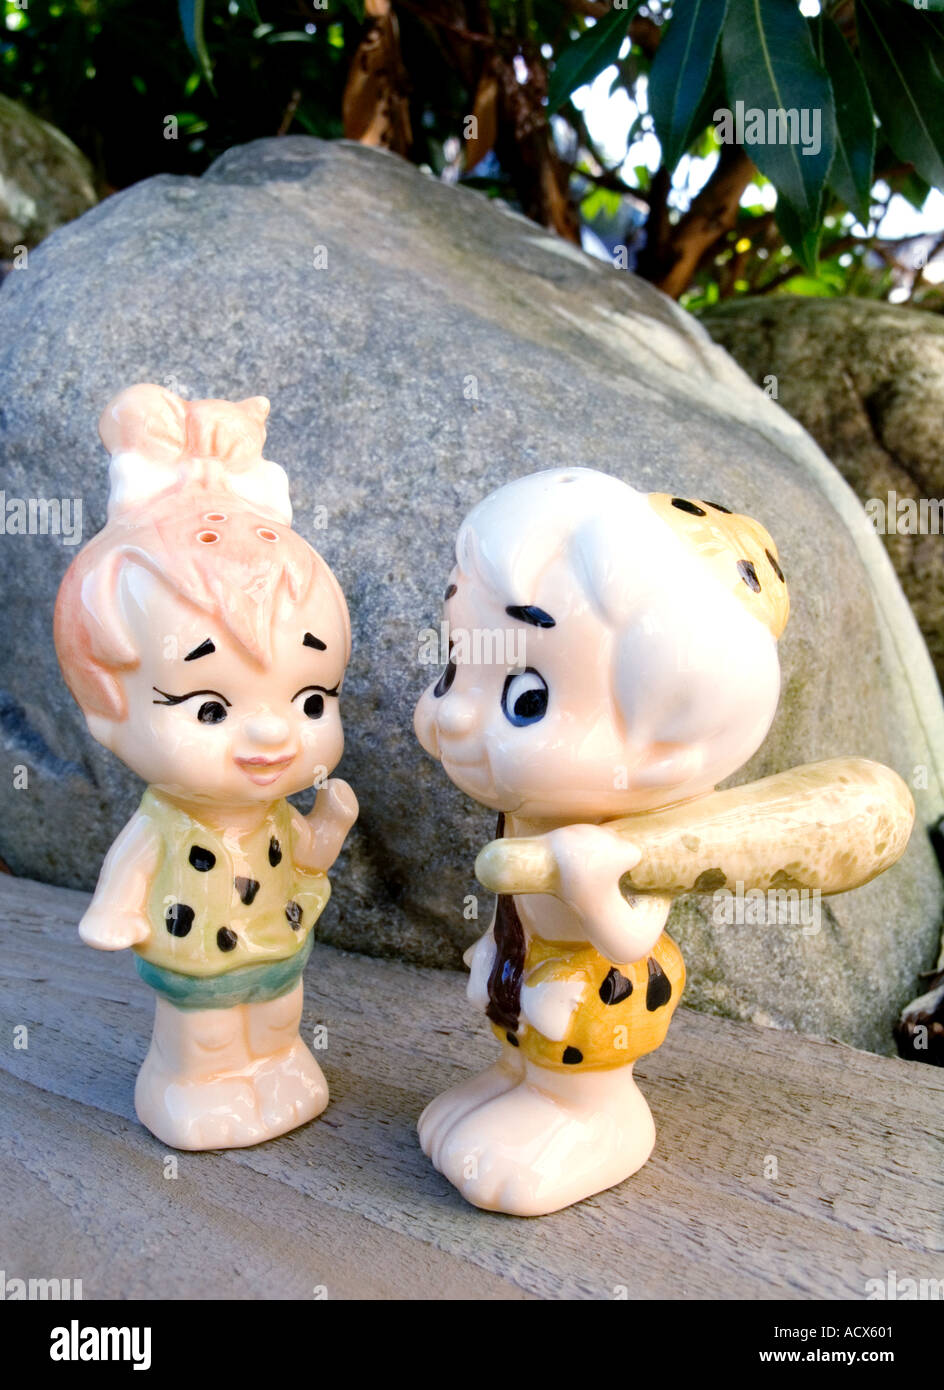 BETTY AND BARNIE RUBBLE SALT AND PEPPER POTS Stock Photo